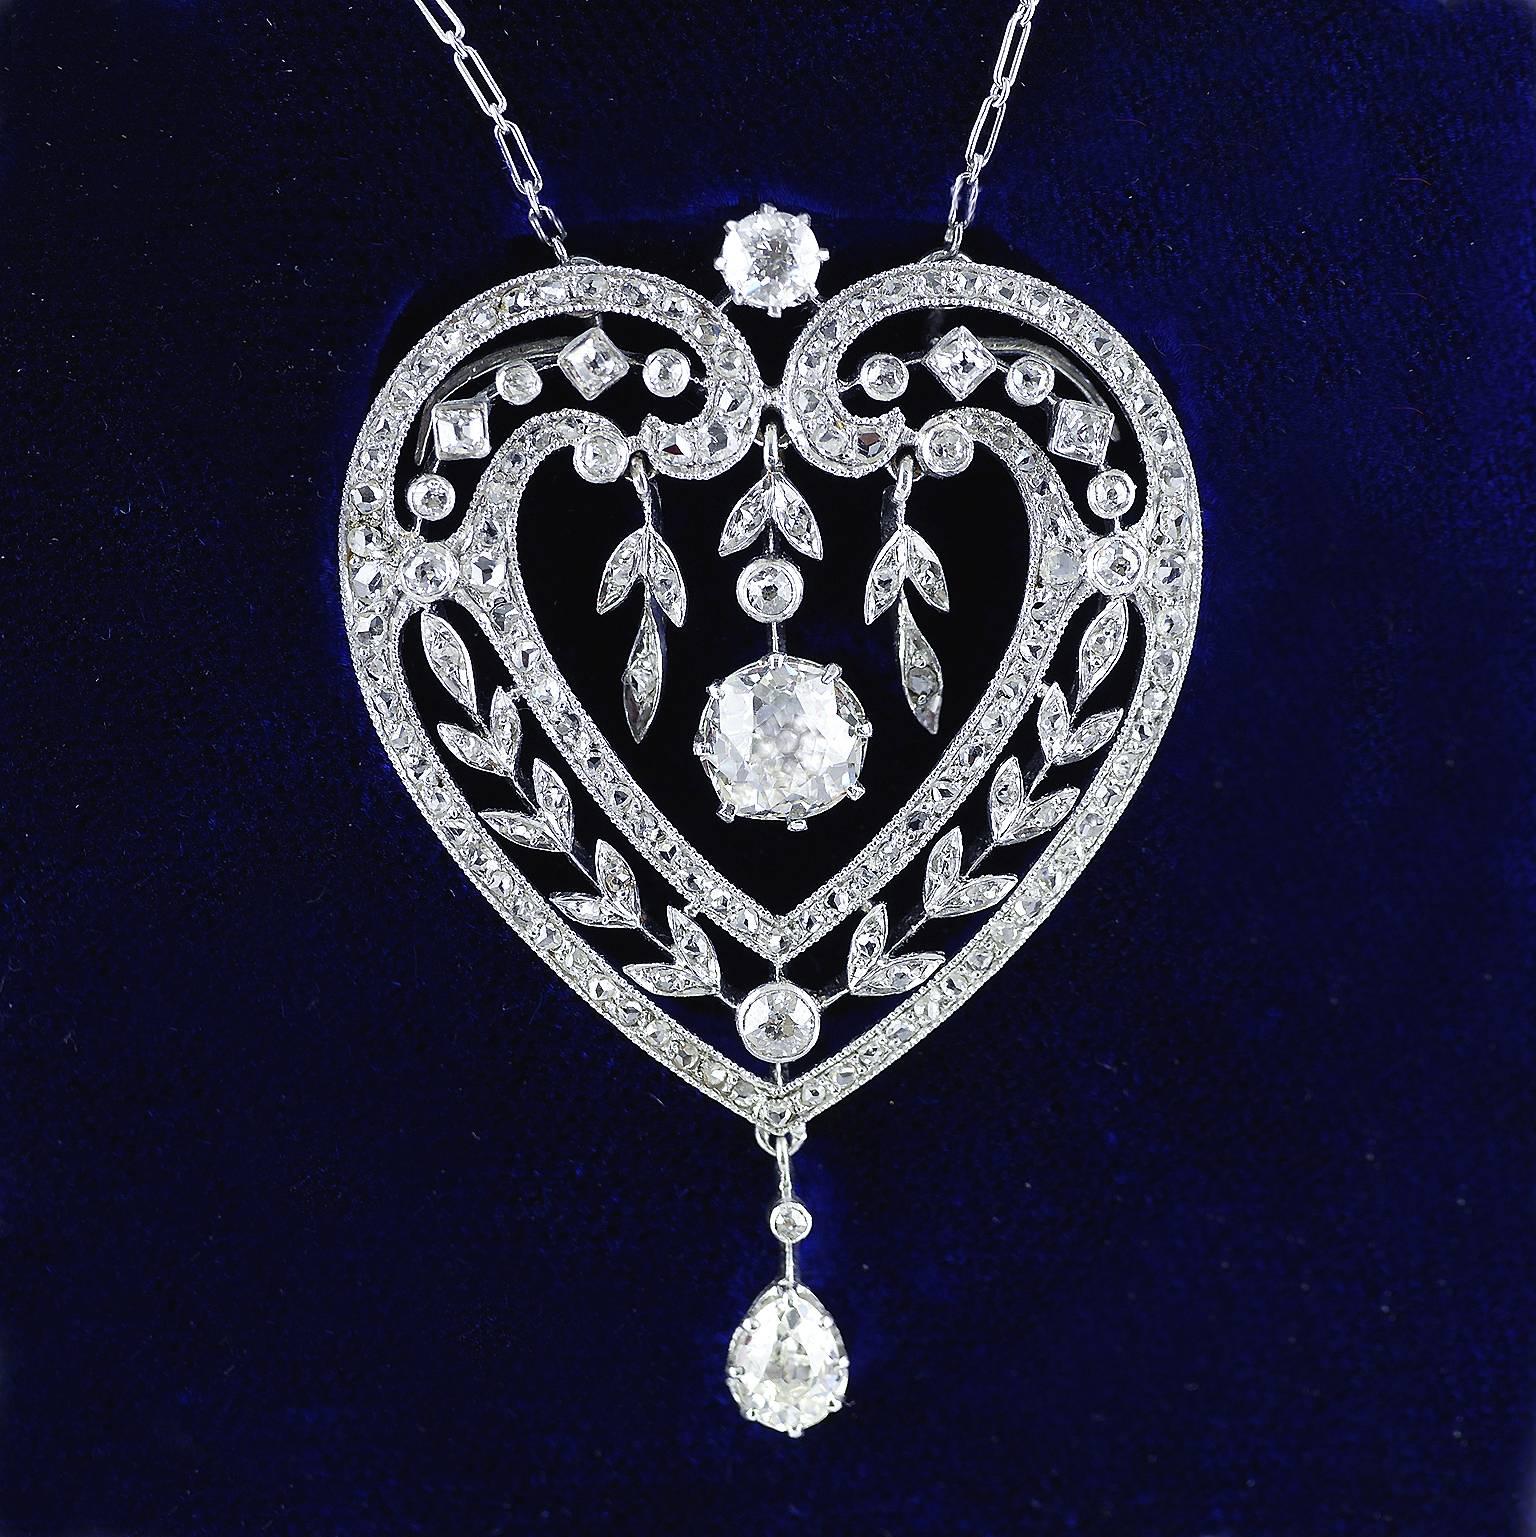 Platinum & Diamond Belle Epoque Heart shaped Pendant dated circa 1910 on a platinum chain.

Articulated central diamond drop, 1.10ct, I, VS2  (Certificated) with two articulated leaf design diamond set drops to either side. Articulated pear shaped